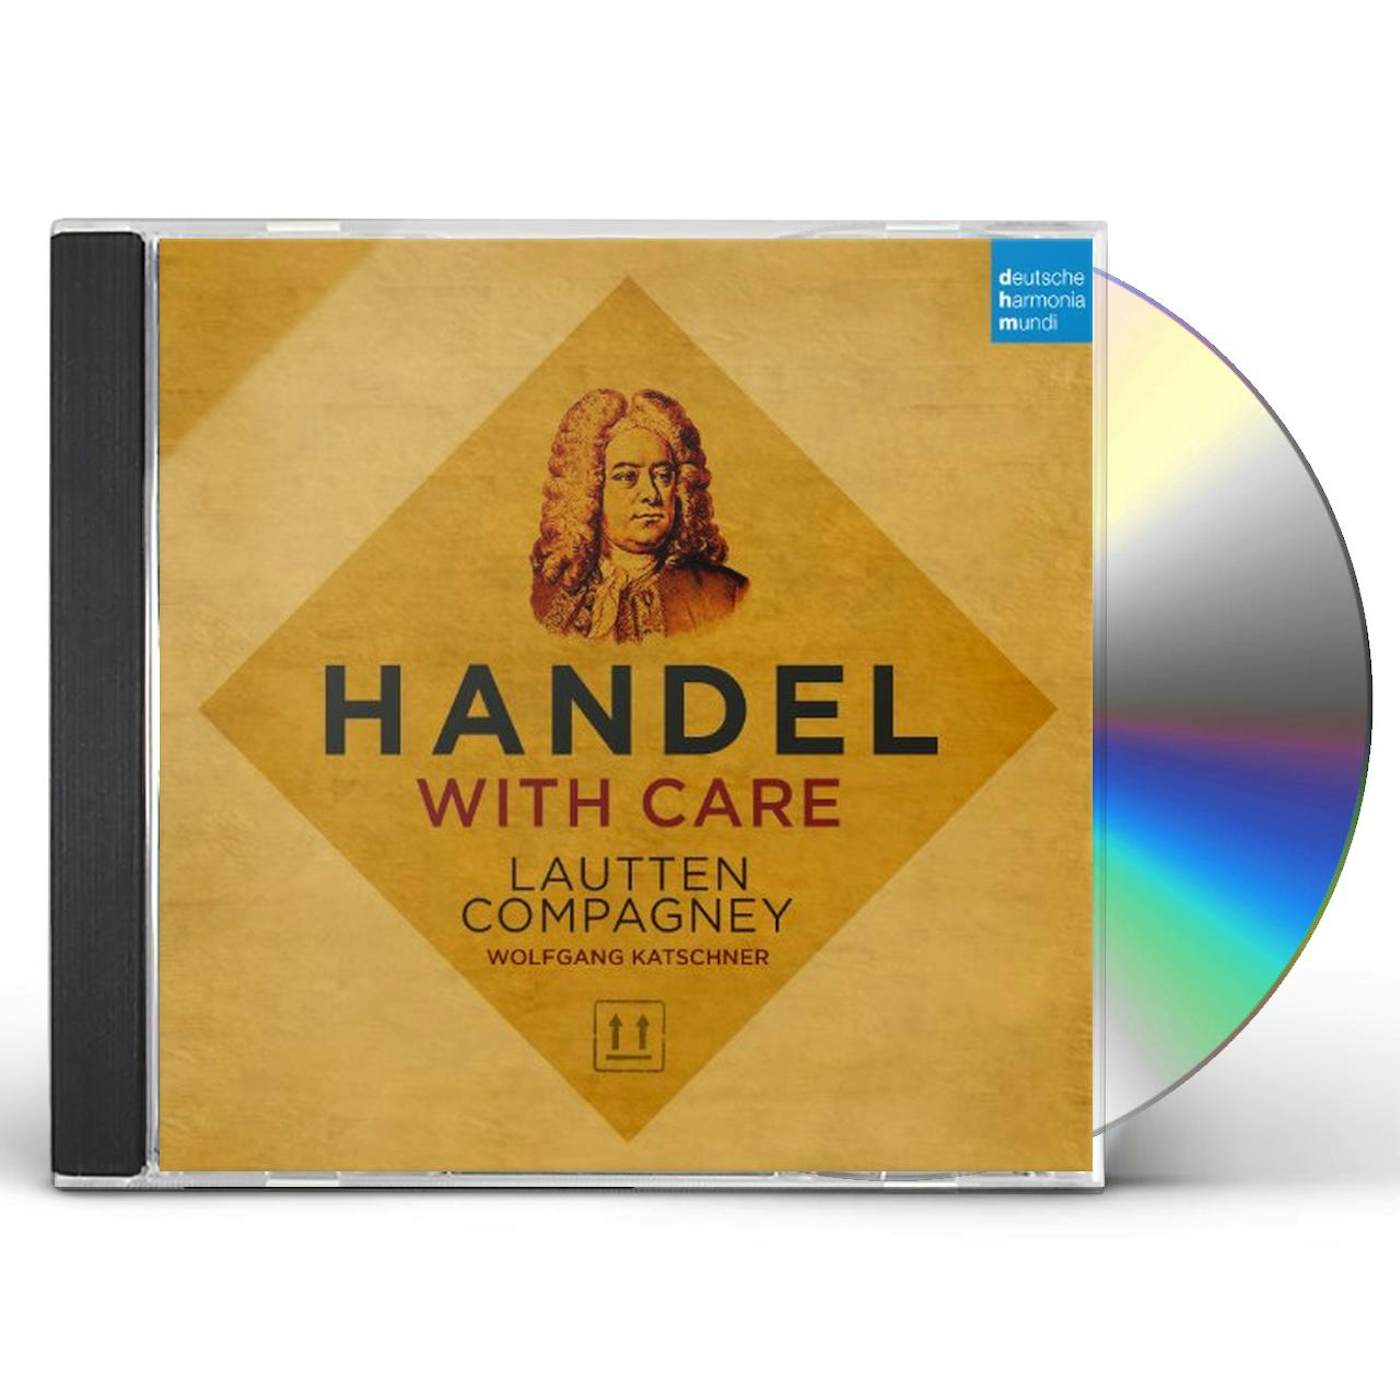 Lautten Compagney HANDEL WITH CARE CD